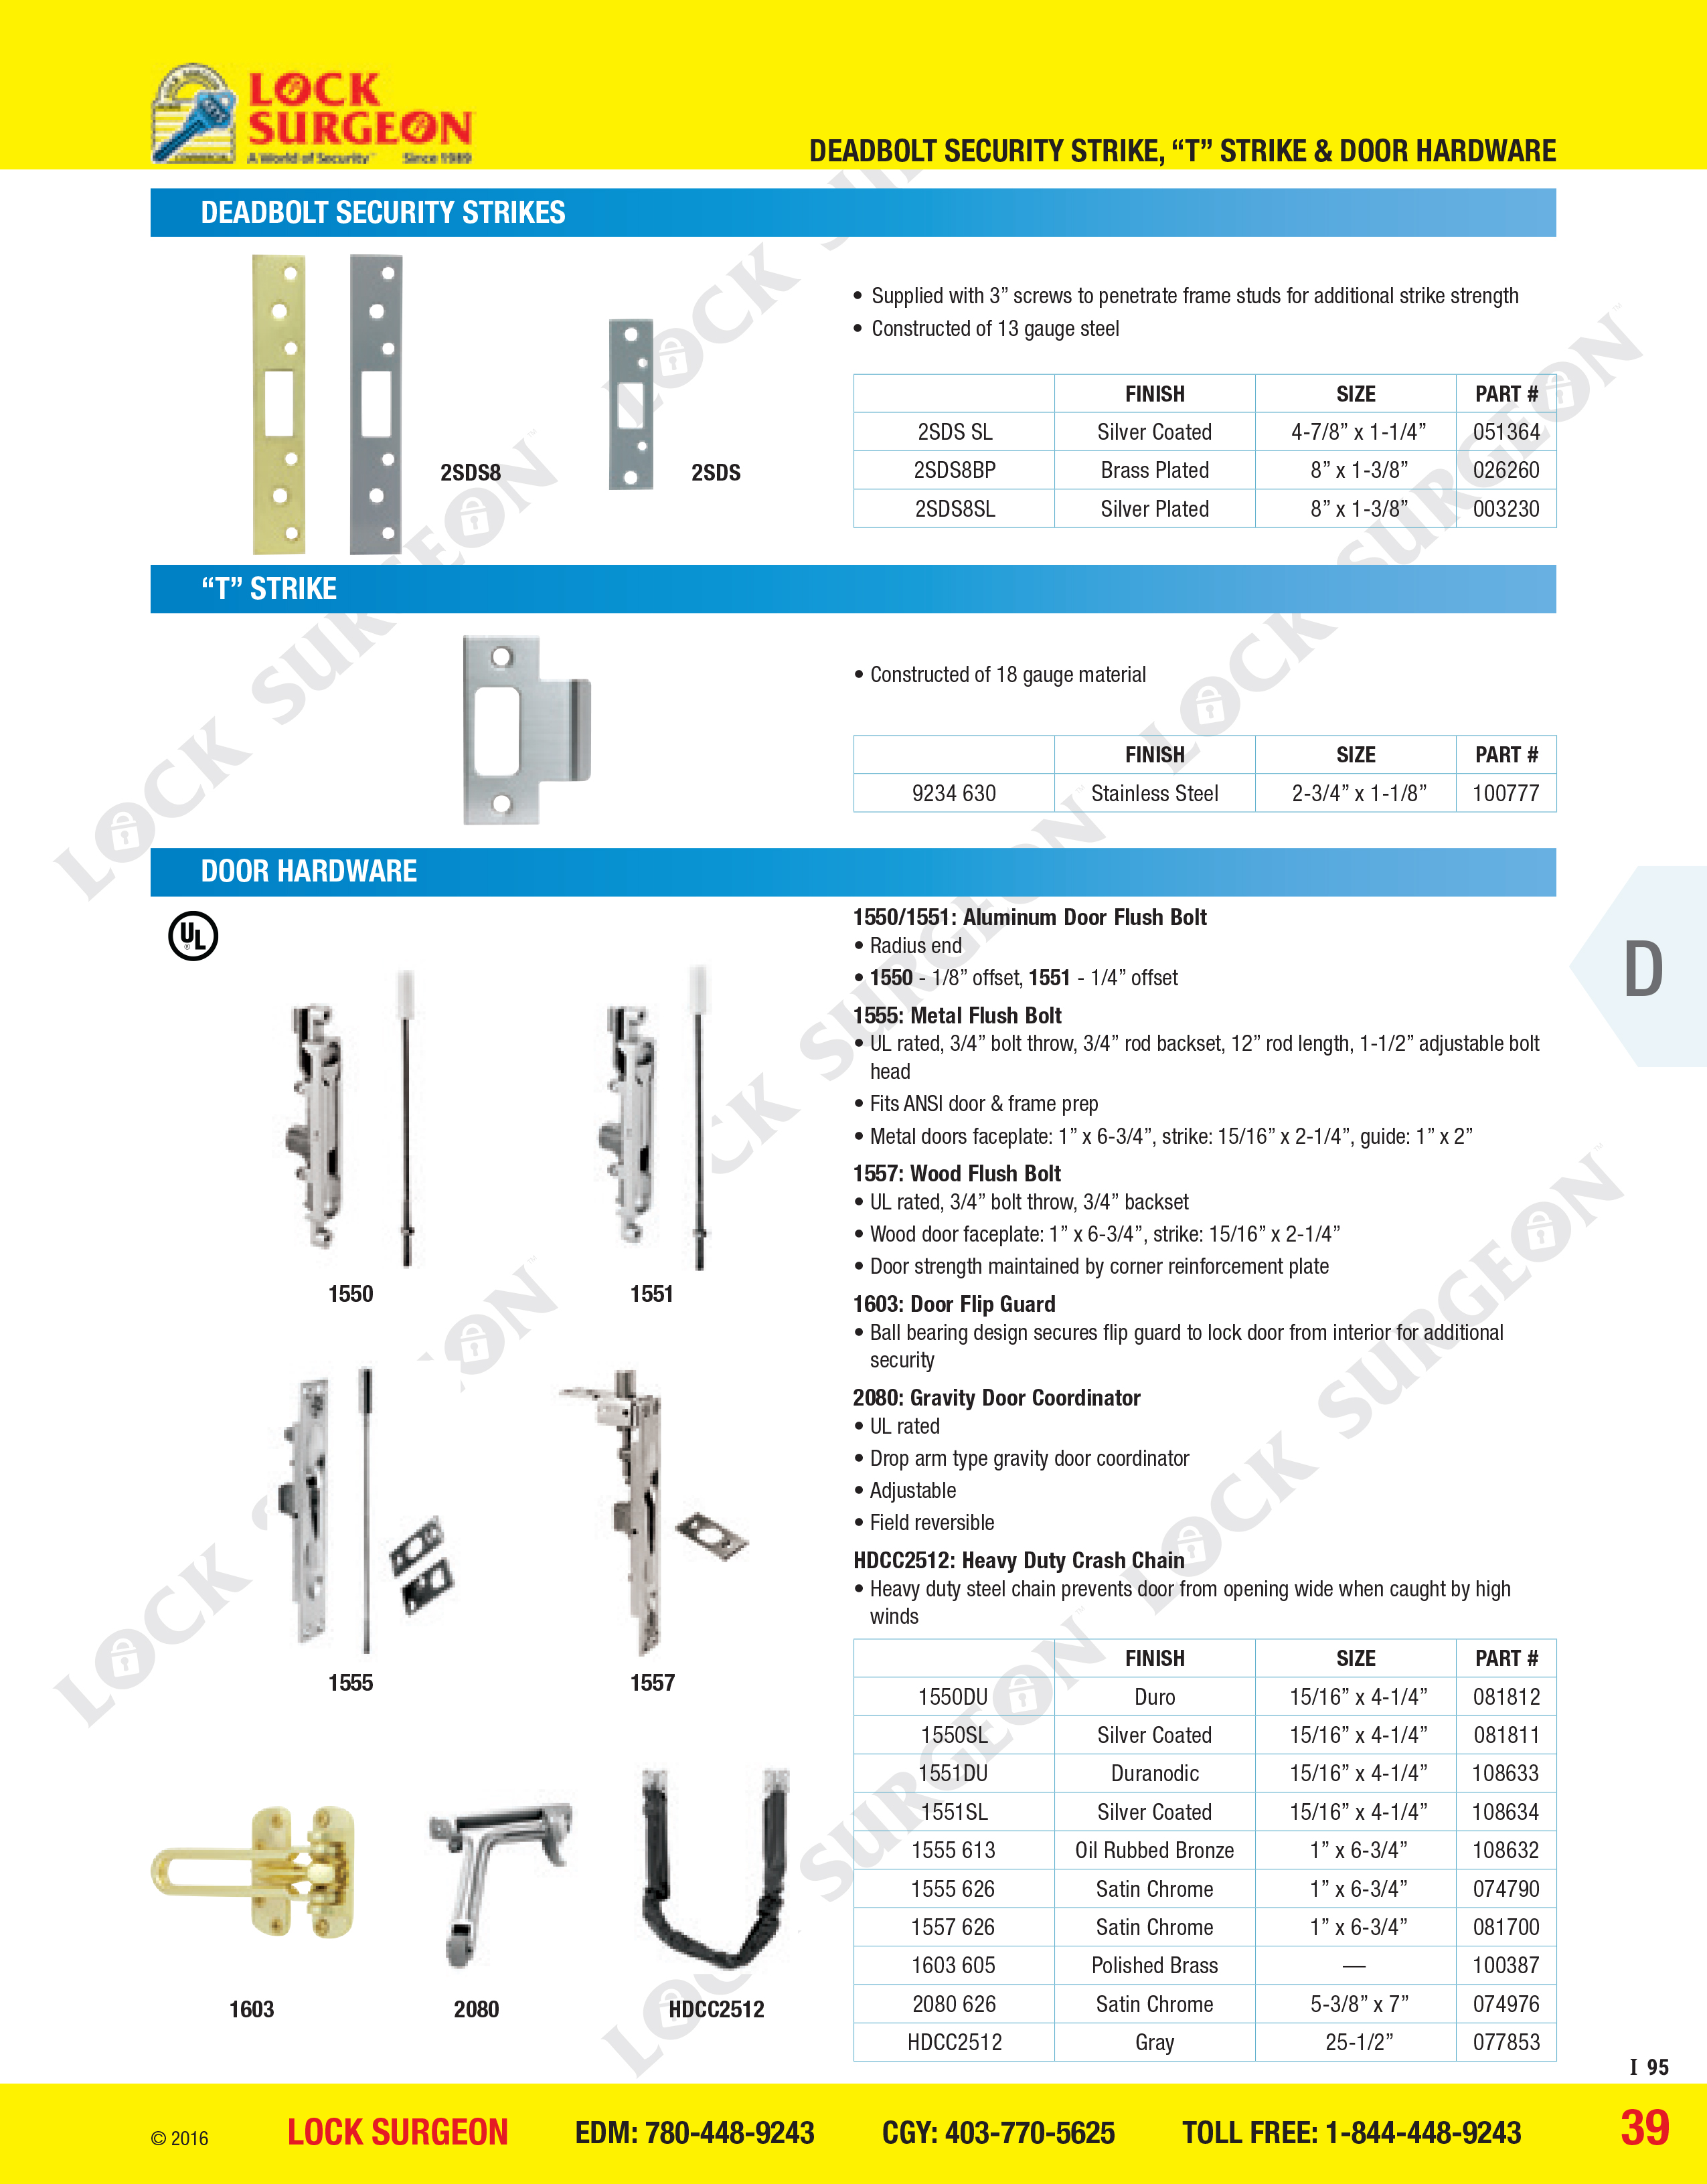 Acheson DonJo Security strikes T-strike & flip-up bolts for steel & glass-aluminium stationary doors